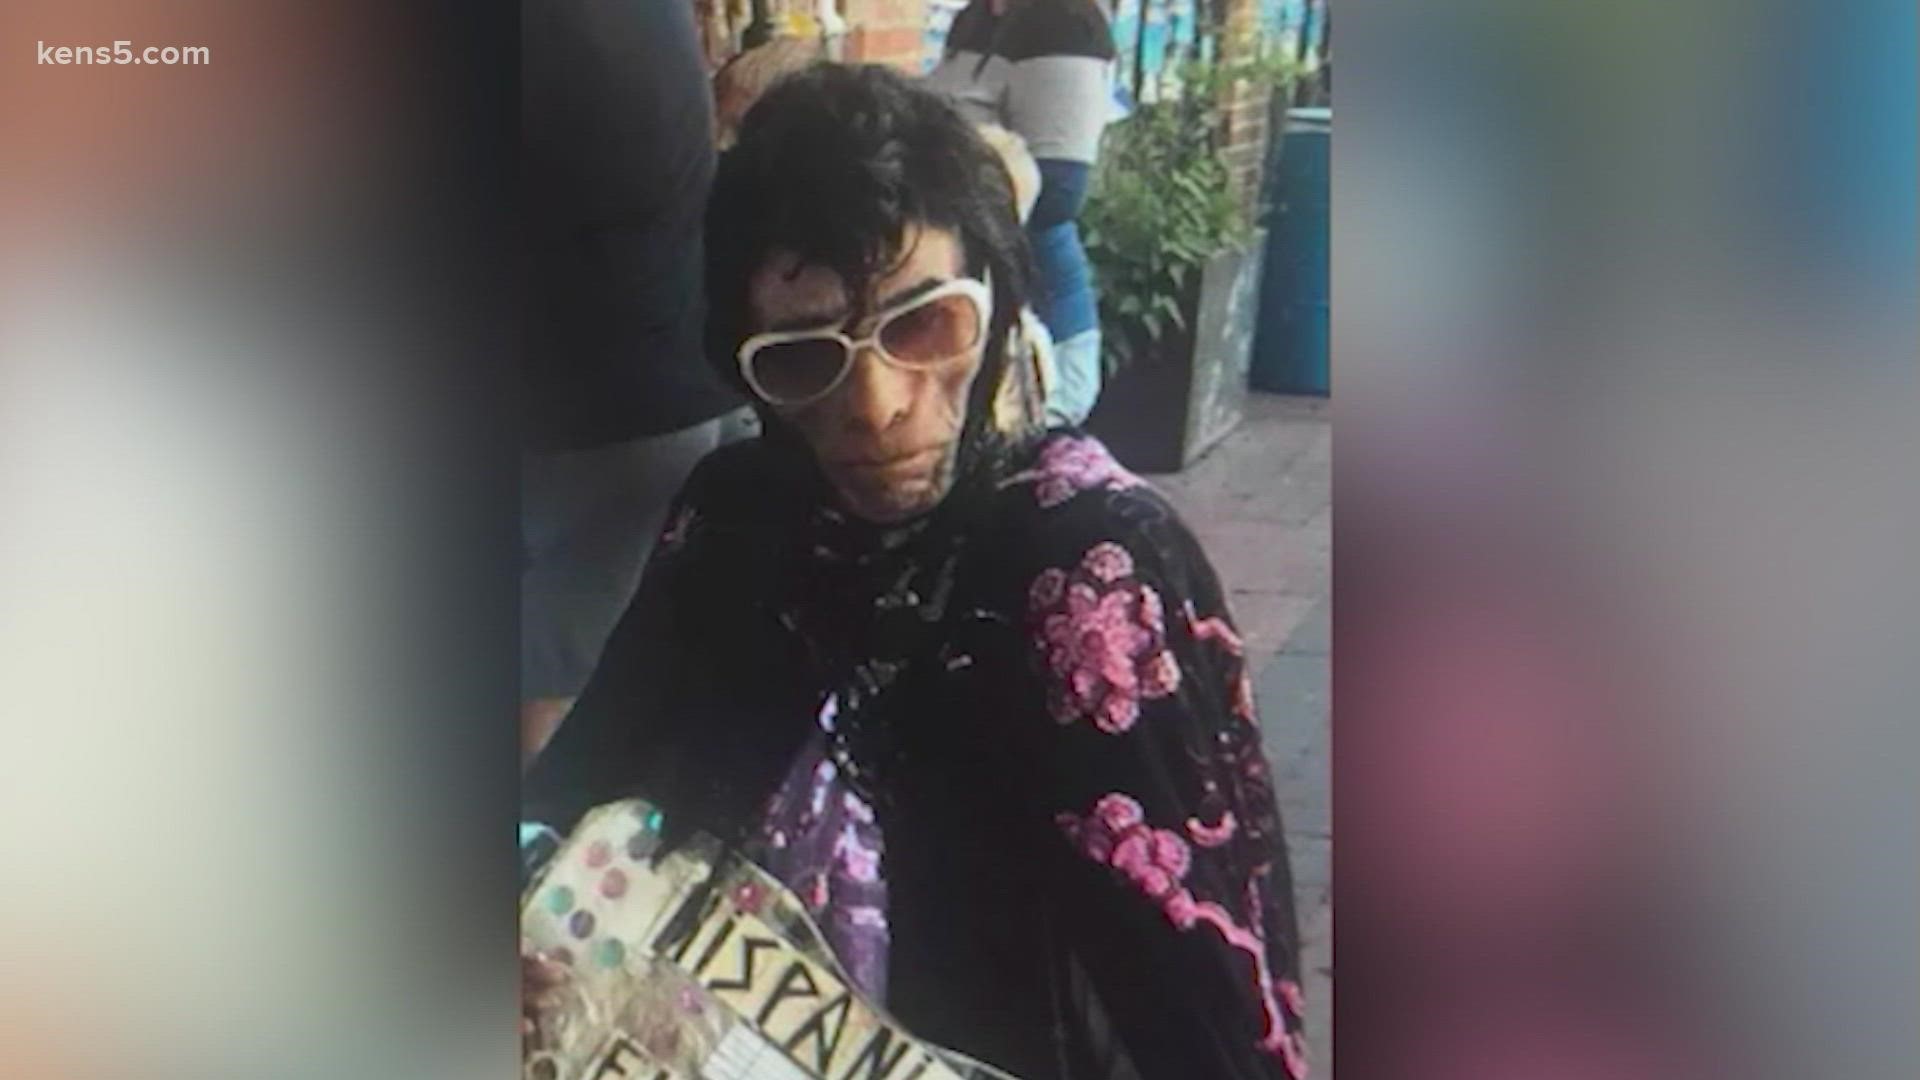 Hispanic Elvis' brother is raising money to help pay for his medical bills.